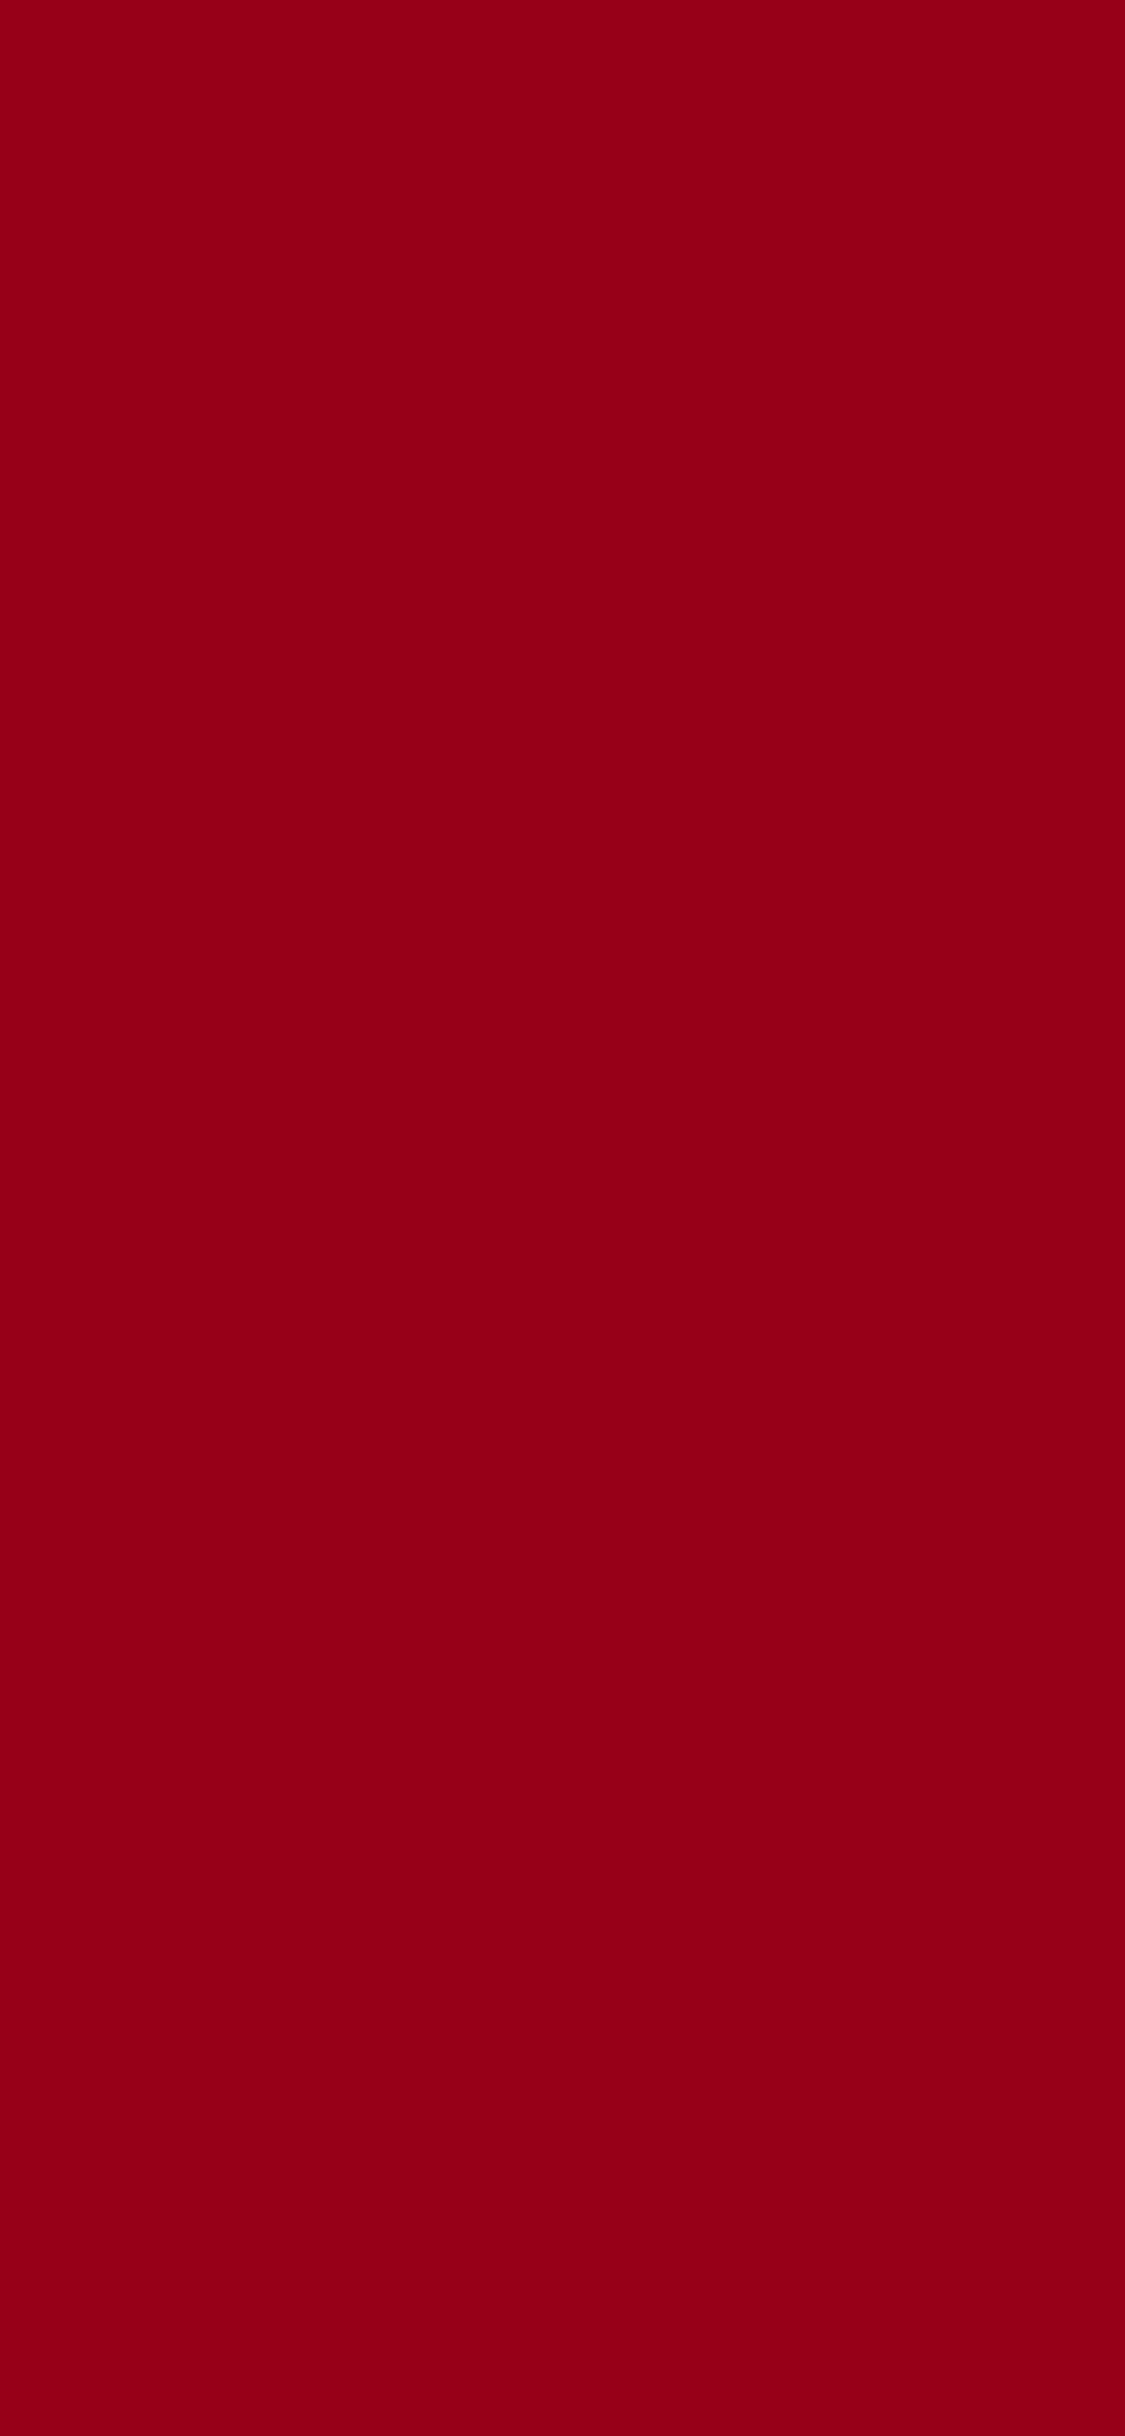 1125x2436 Carmine Solid Color Background